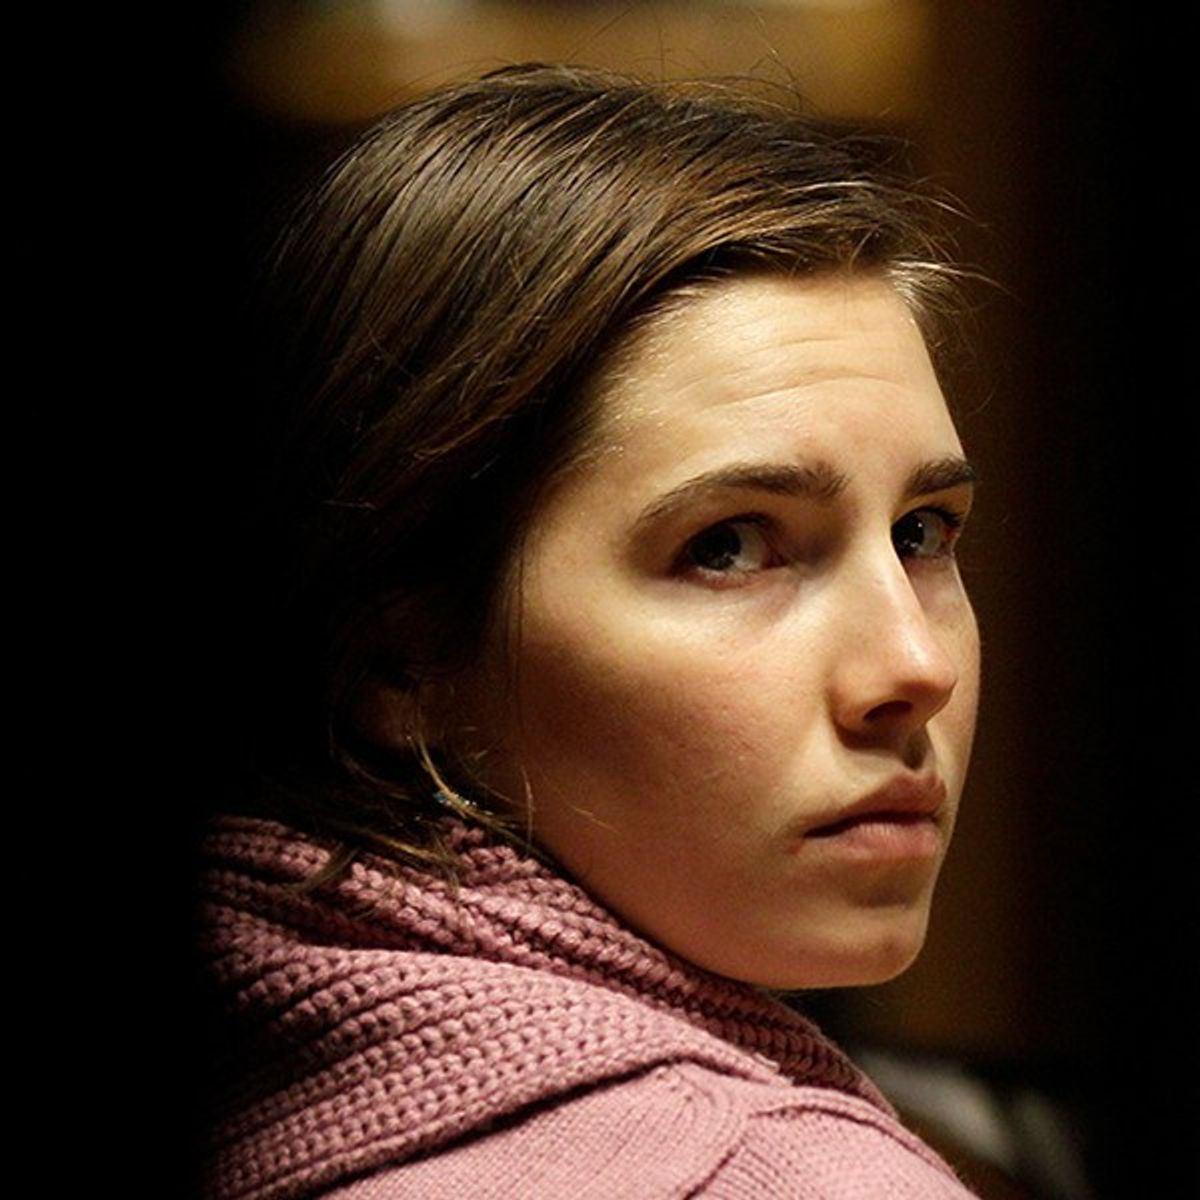 Who's the Victim? A Reply To The Amanda Knox Documentary